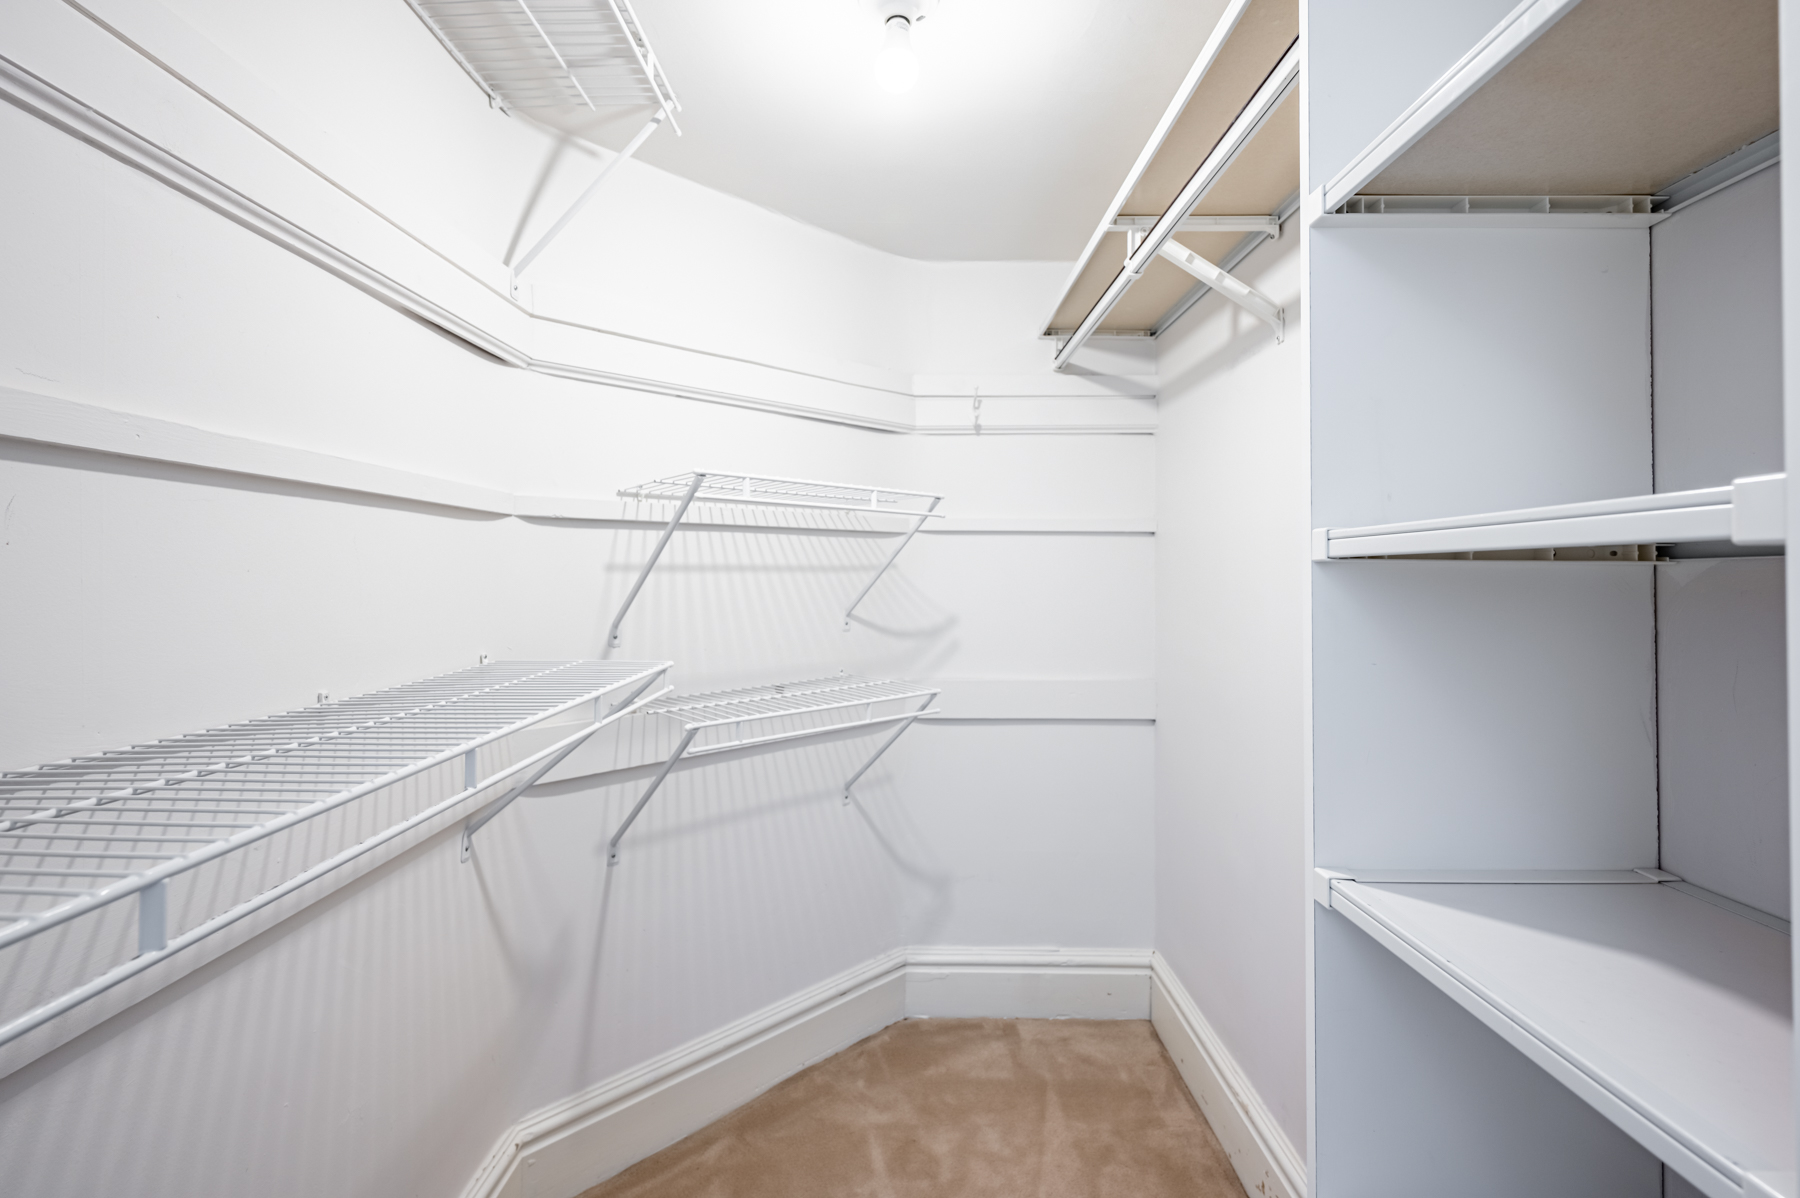 Walk-in closet with wire shelves and compartments.